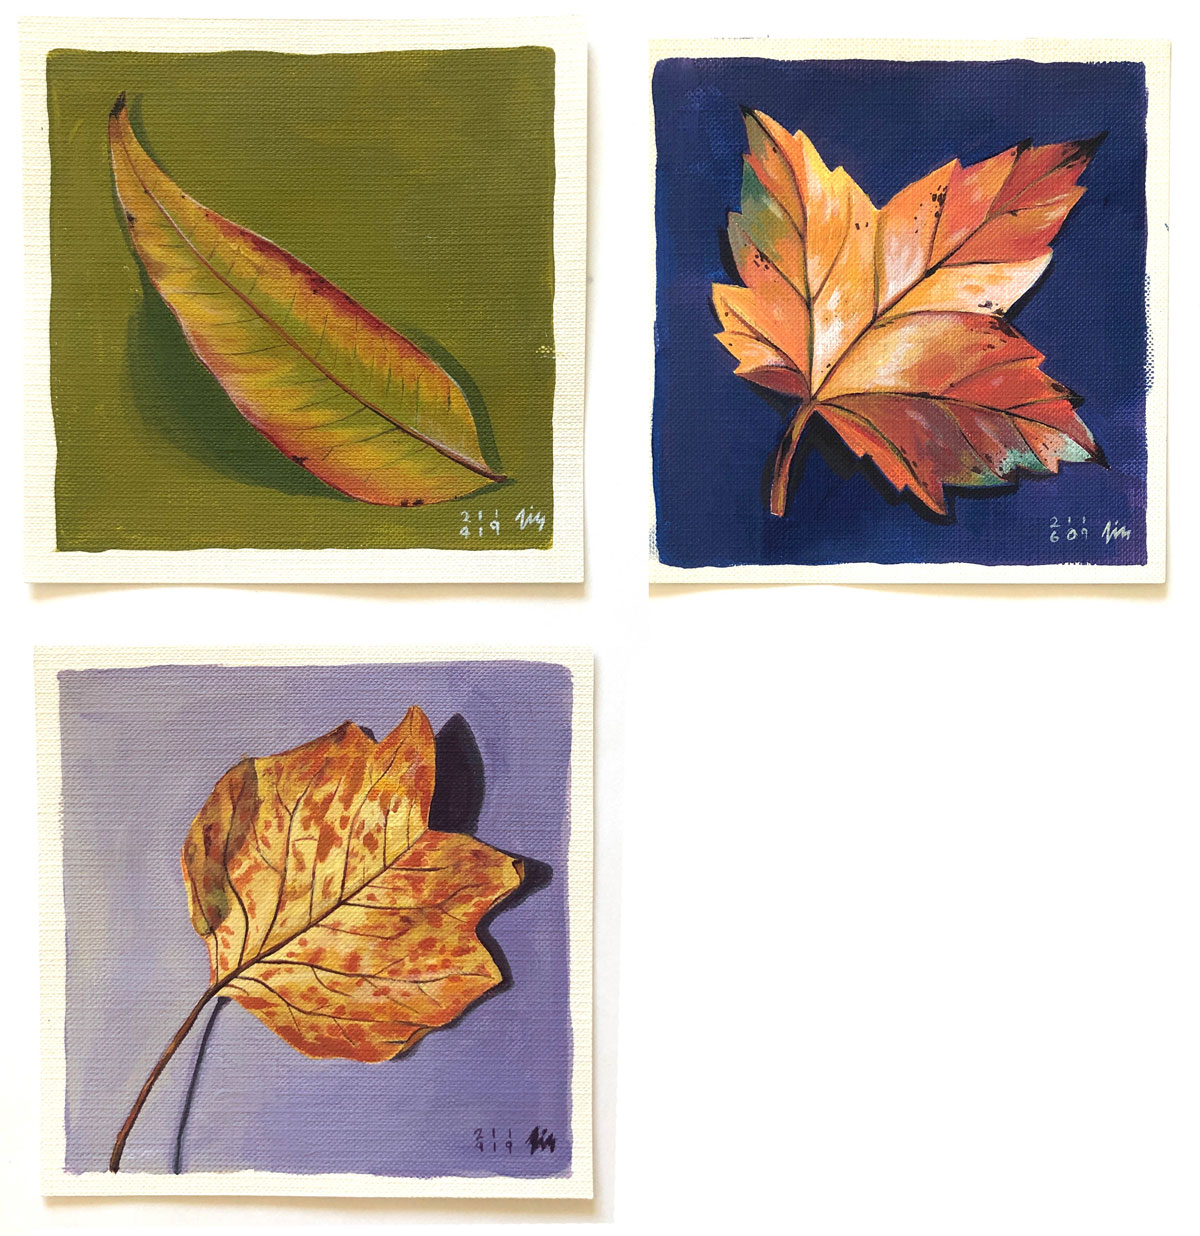 Fall Leaves, a series of small paintings by Liz Broekhuyse